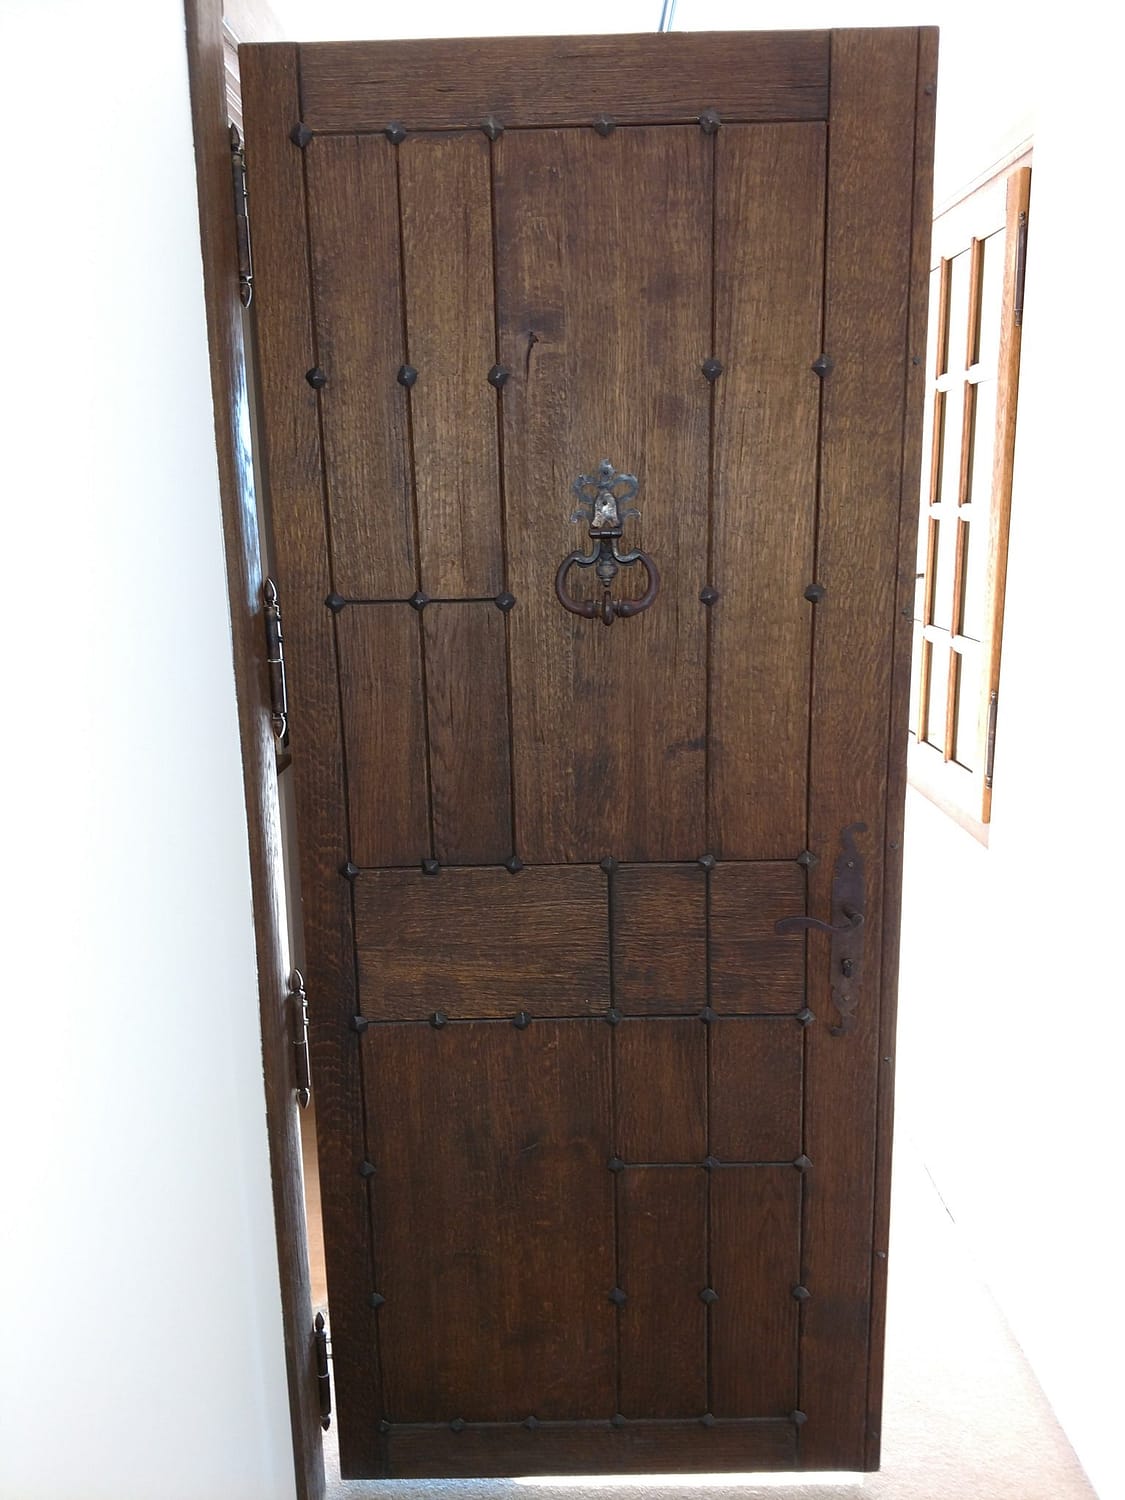 A custom wood with iron accents entryway door